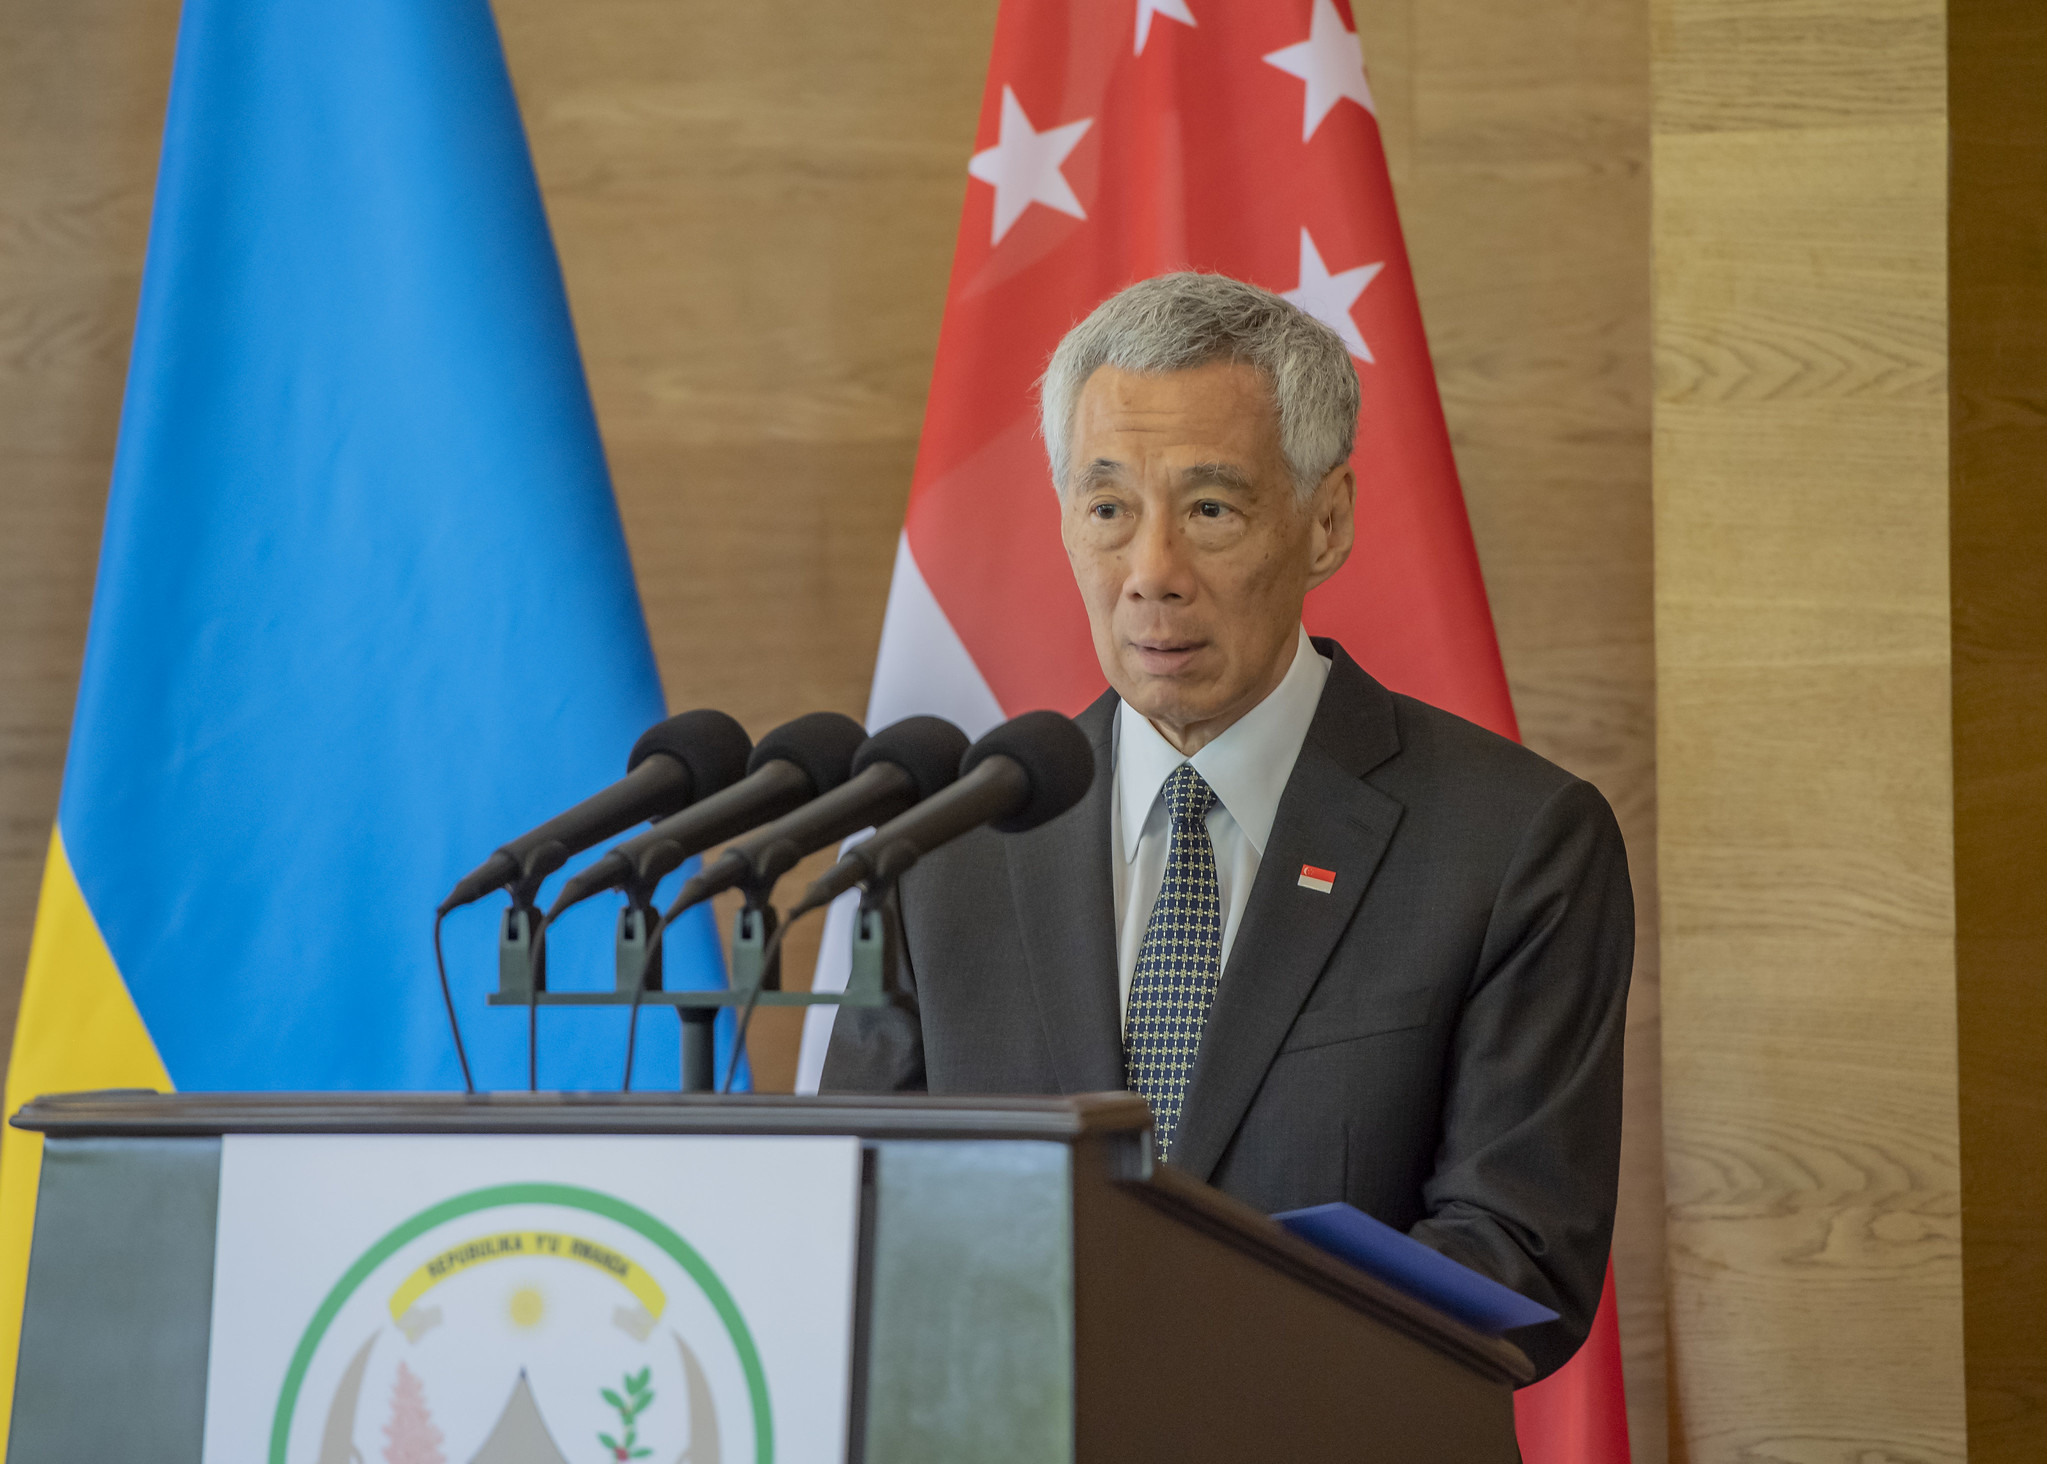 Lee Hsien Loong, Singaporean Prime Minister addresses the media during  a joint press conference following his meeting with President Kagame at Village Urugwiro on Monday, June 27.  Photo by Village Urugwiro